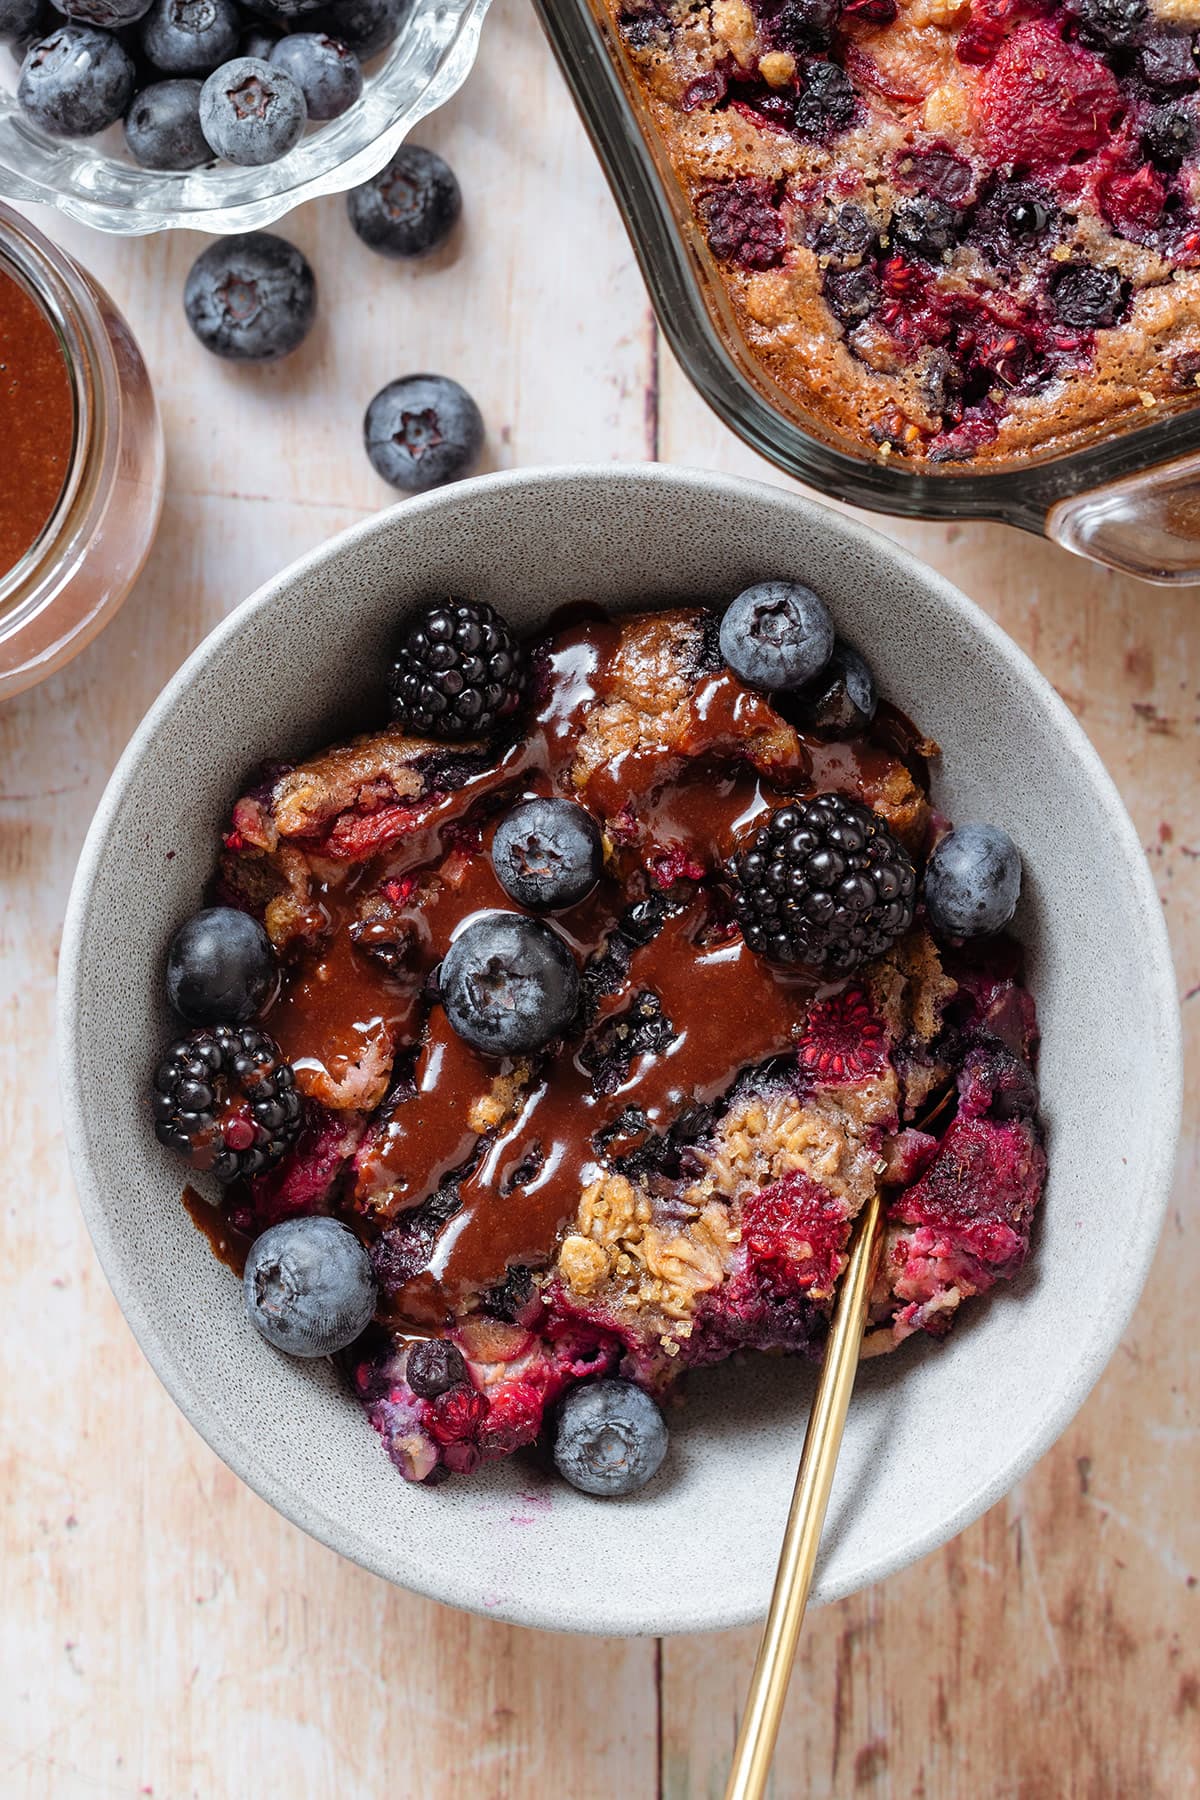 Baked berry oatmeal in a grey bowl topped with blueberries and blackberries and drizzled with chocolate sauce.